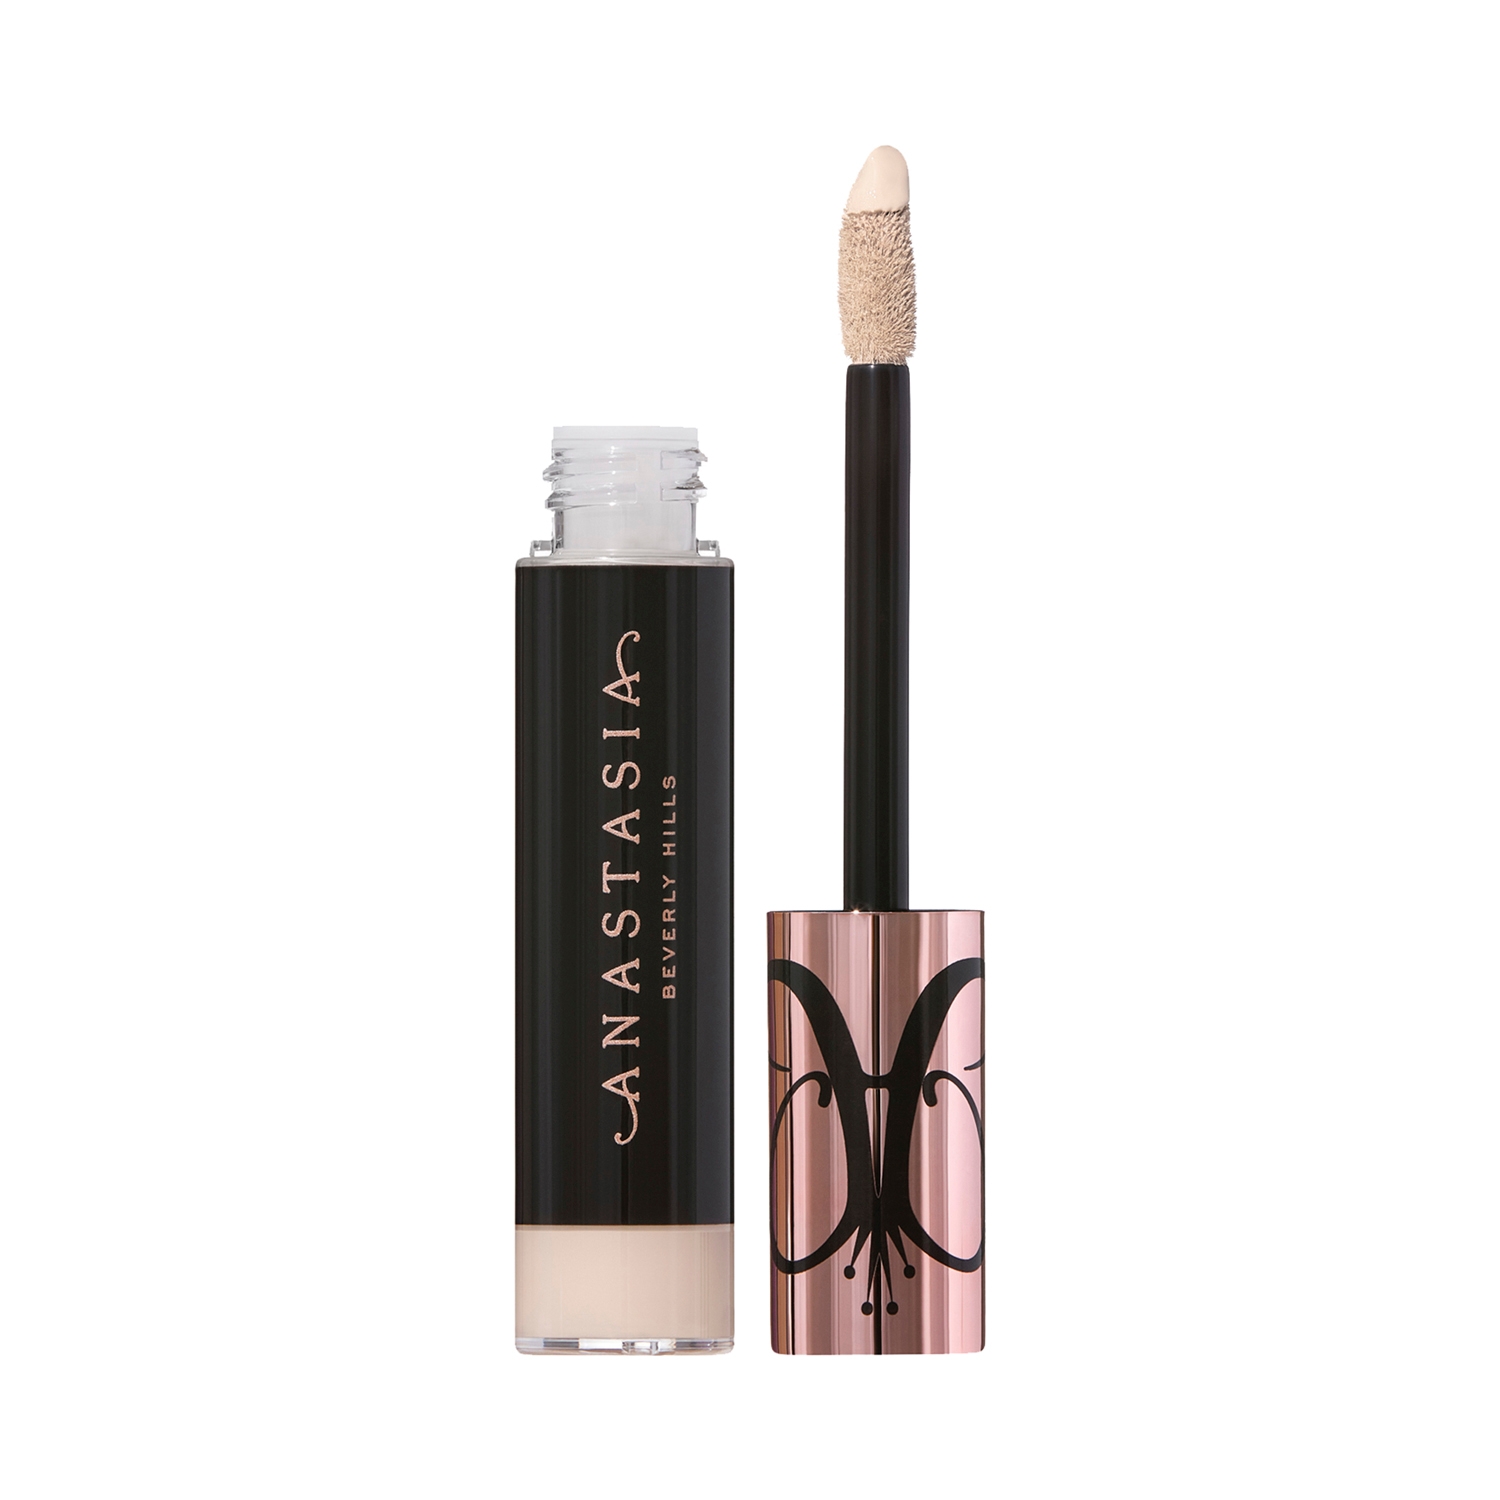 Anastasia Beverly Hills | Anastasia Beverly Hills Magic Touch Concealer - Shade 4 (12ml)